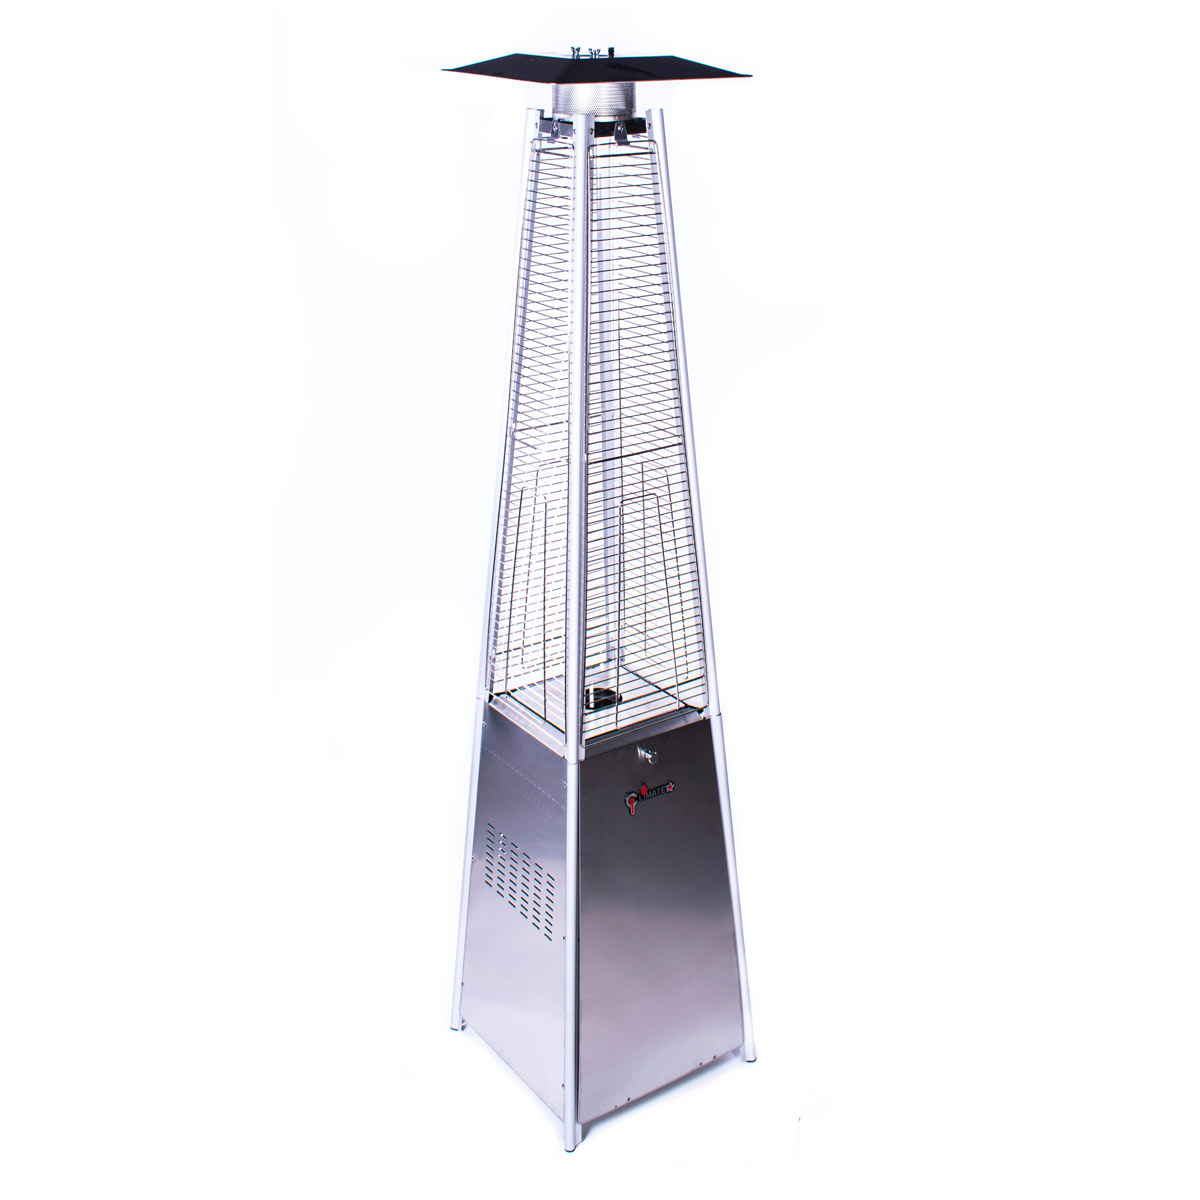 Quartz tube pyramid patio heater with electric ignition stainless steel